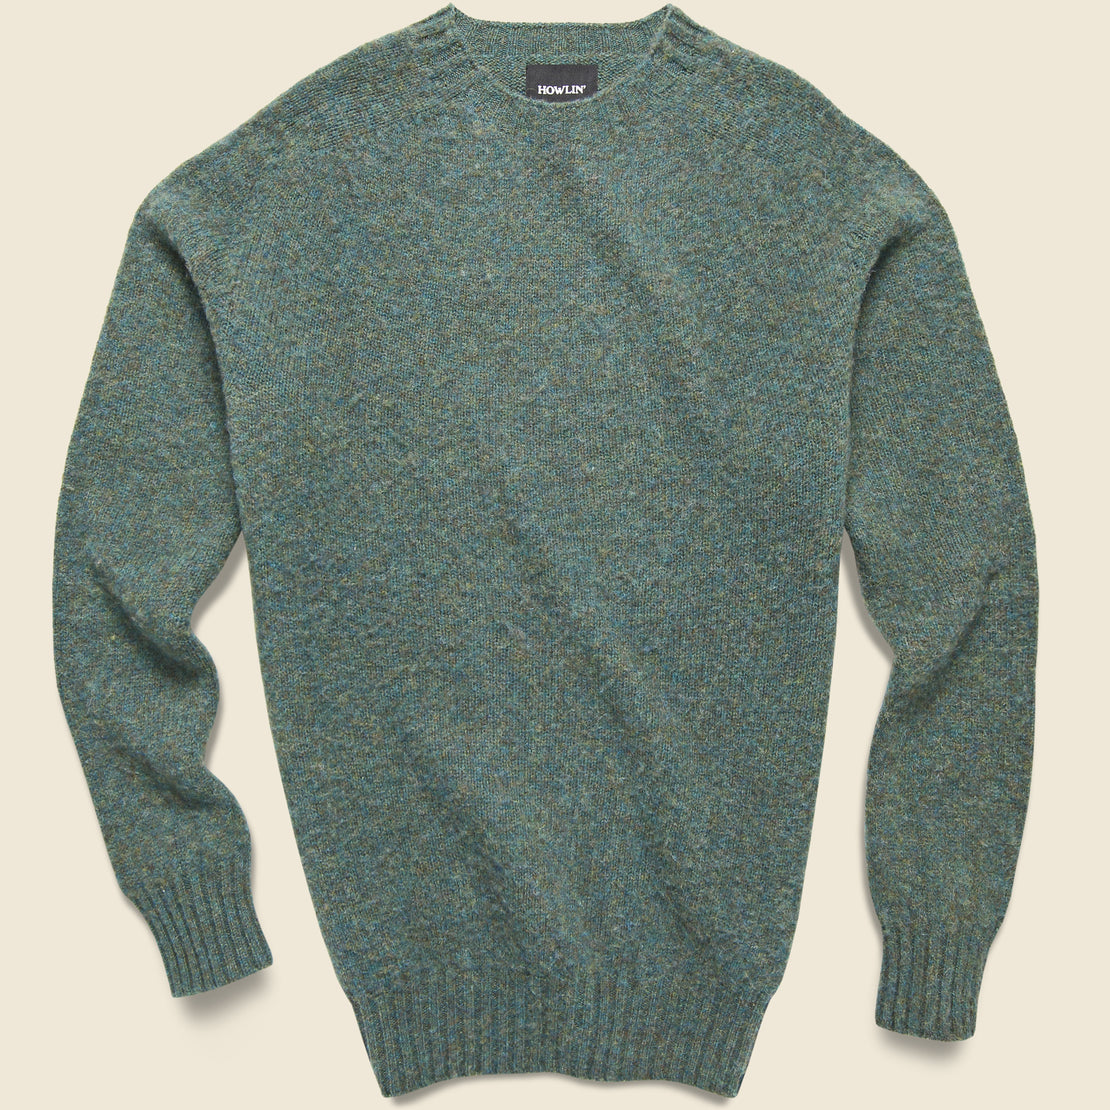 Howlin Birth Of The Cool Solid Crew Sweater - Exotique (Teal)